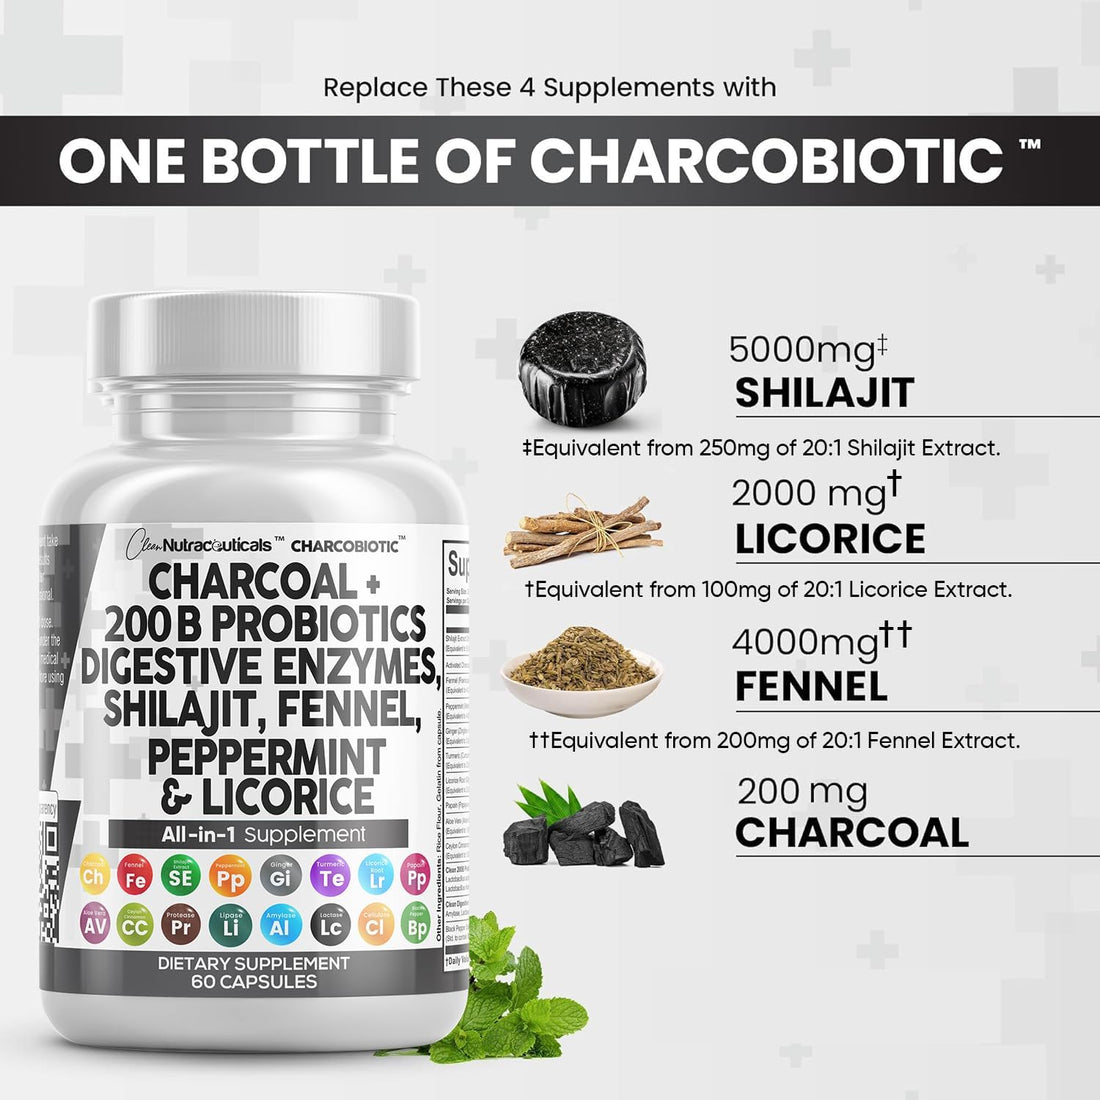 Charcobiotic™ with Activated Charcoal